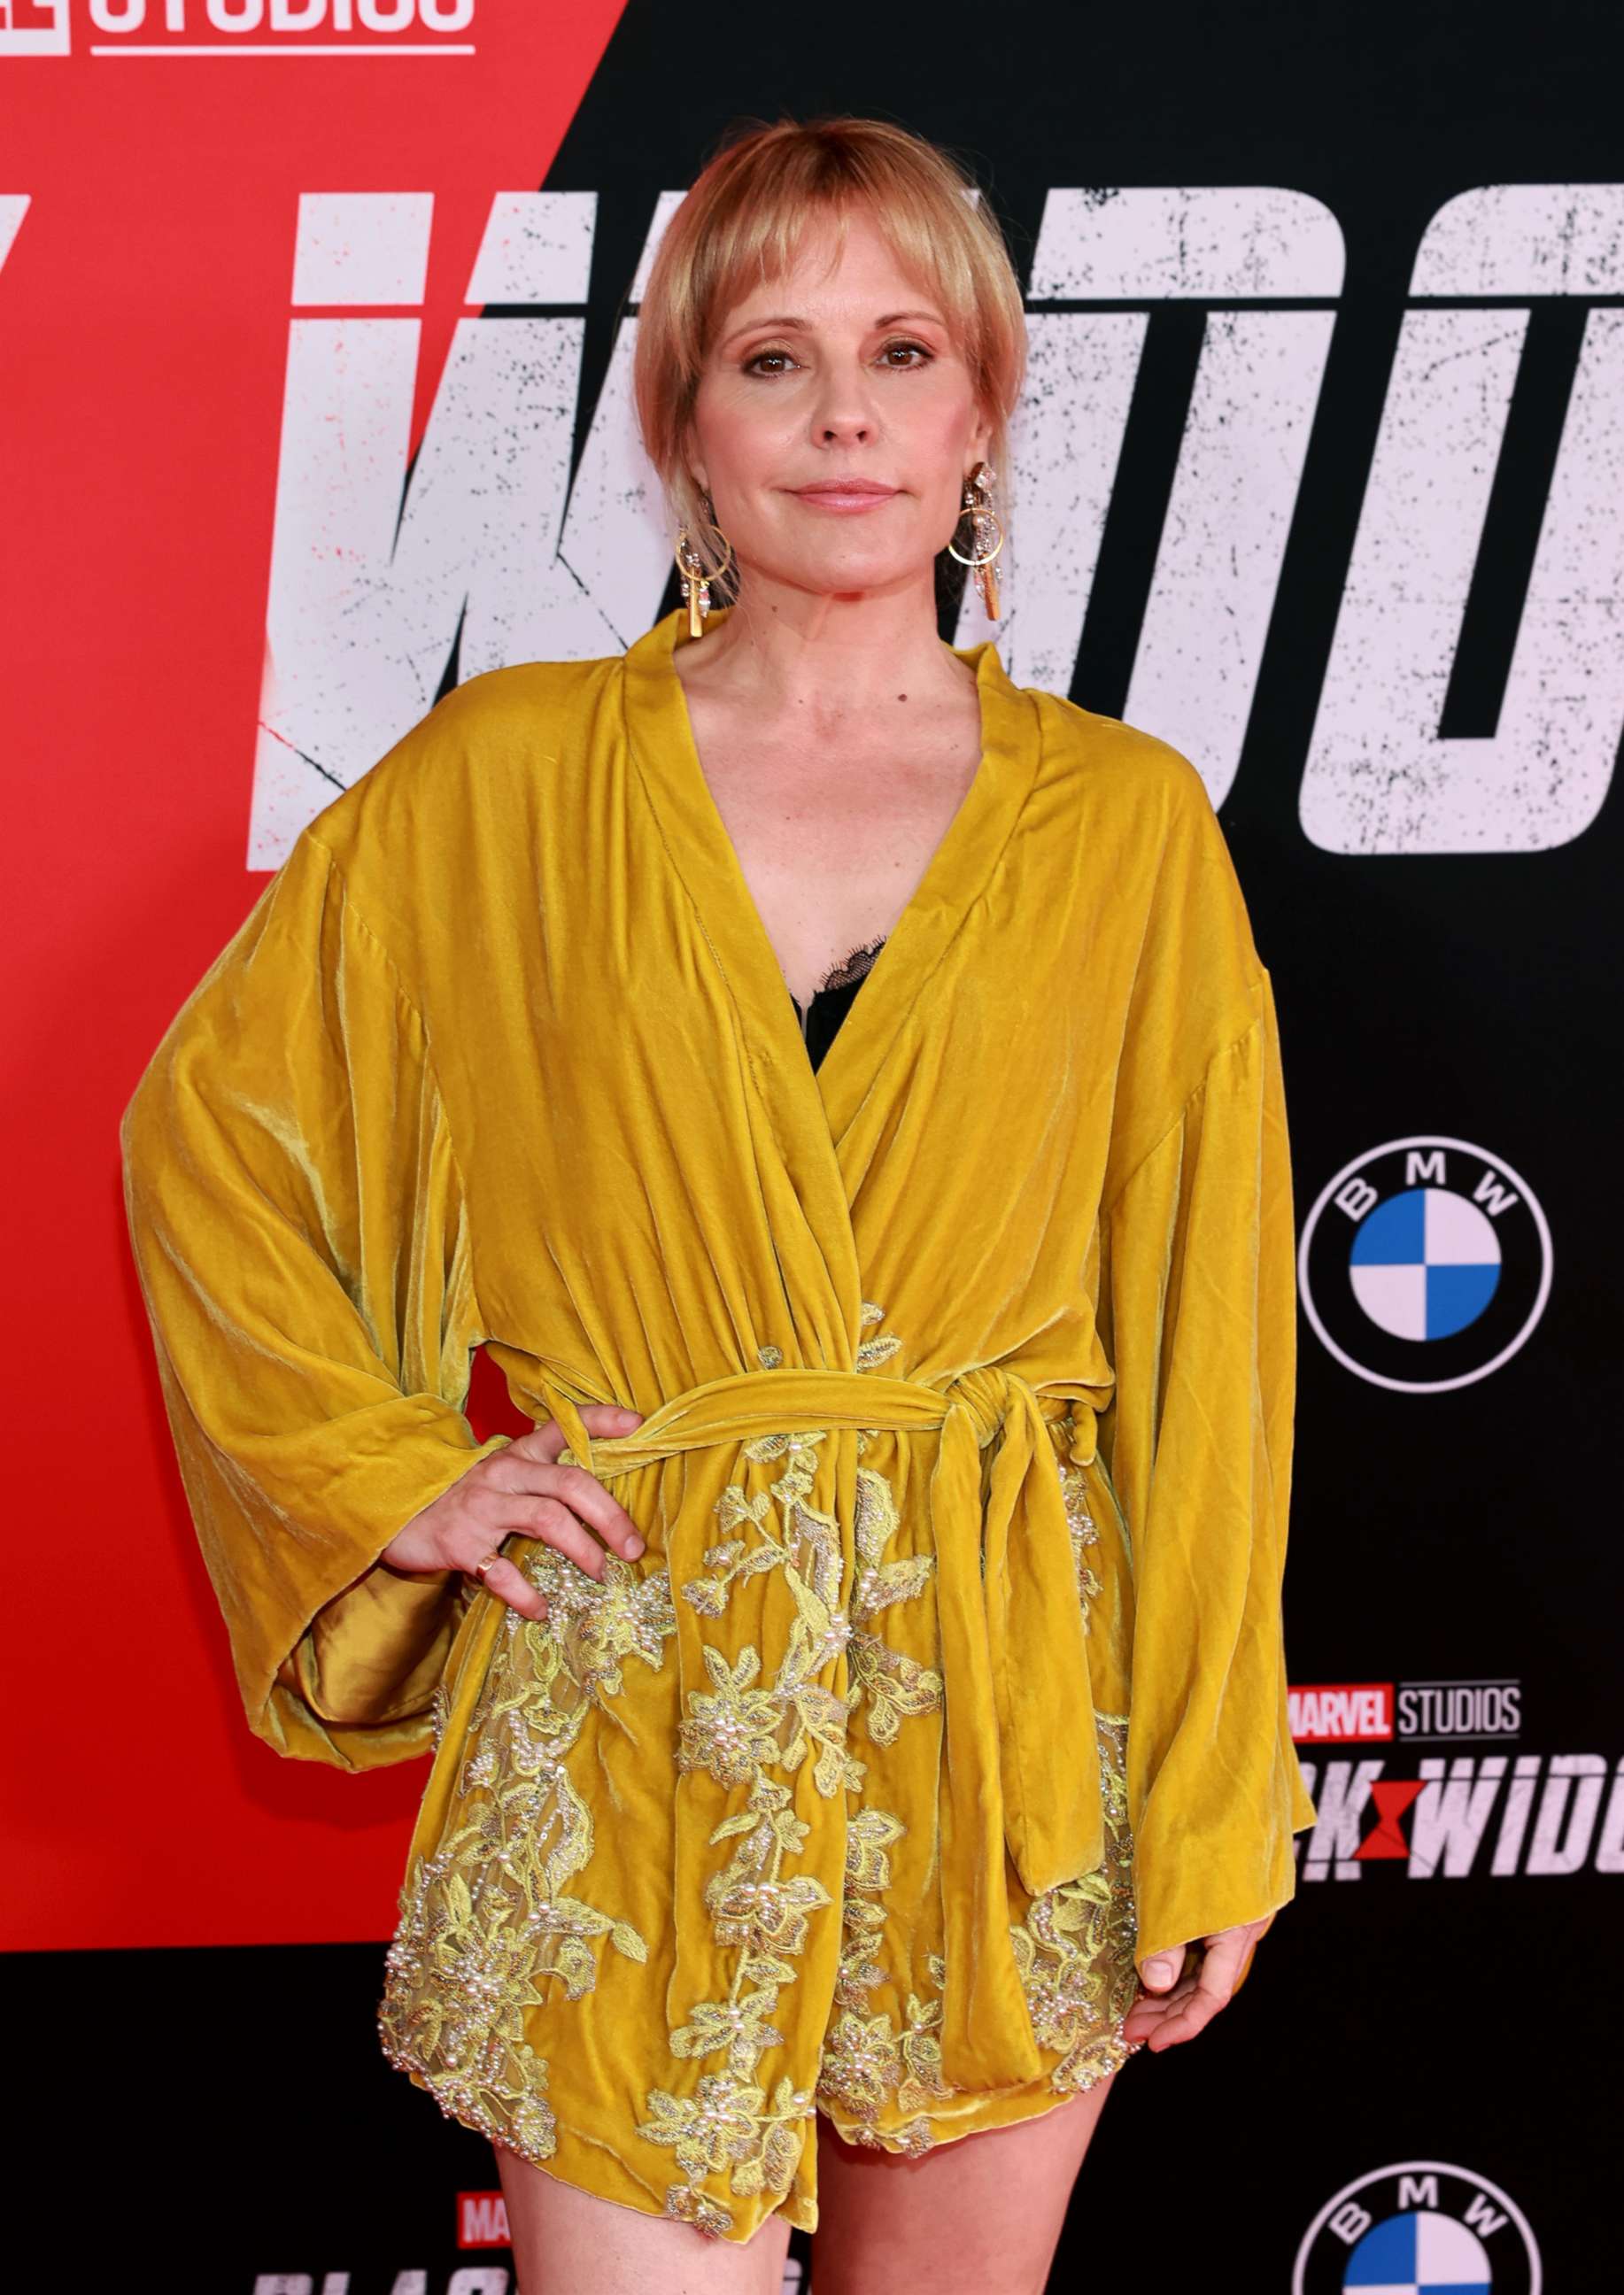 PHOTO: In this June 29, 2021, file photo, Emma Caulfield Ford attends the Marvel Studios' 'Black Widow' Fan Event in Los Angeles.